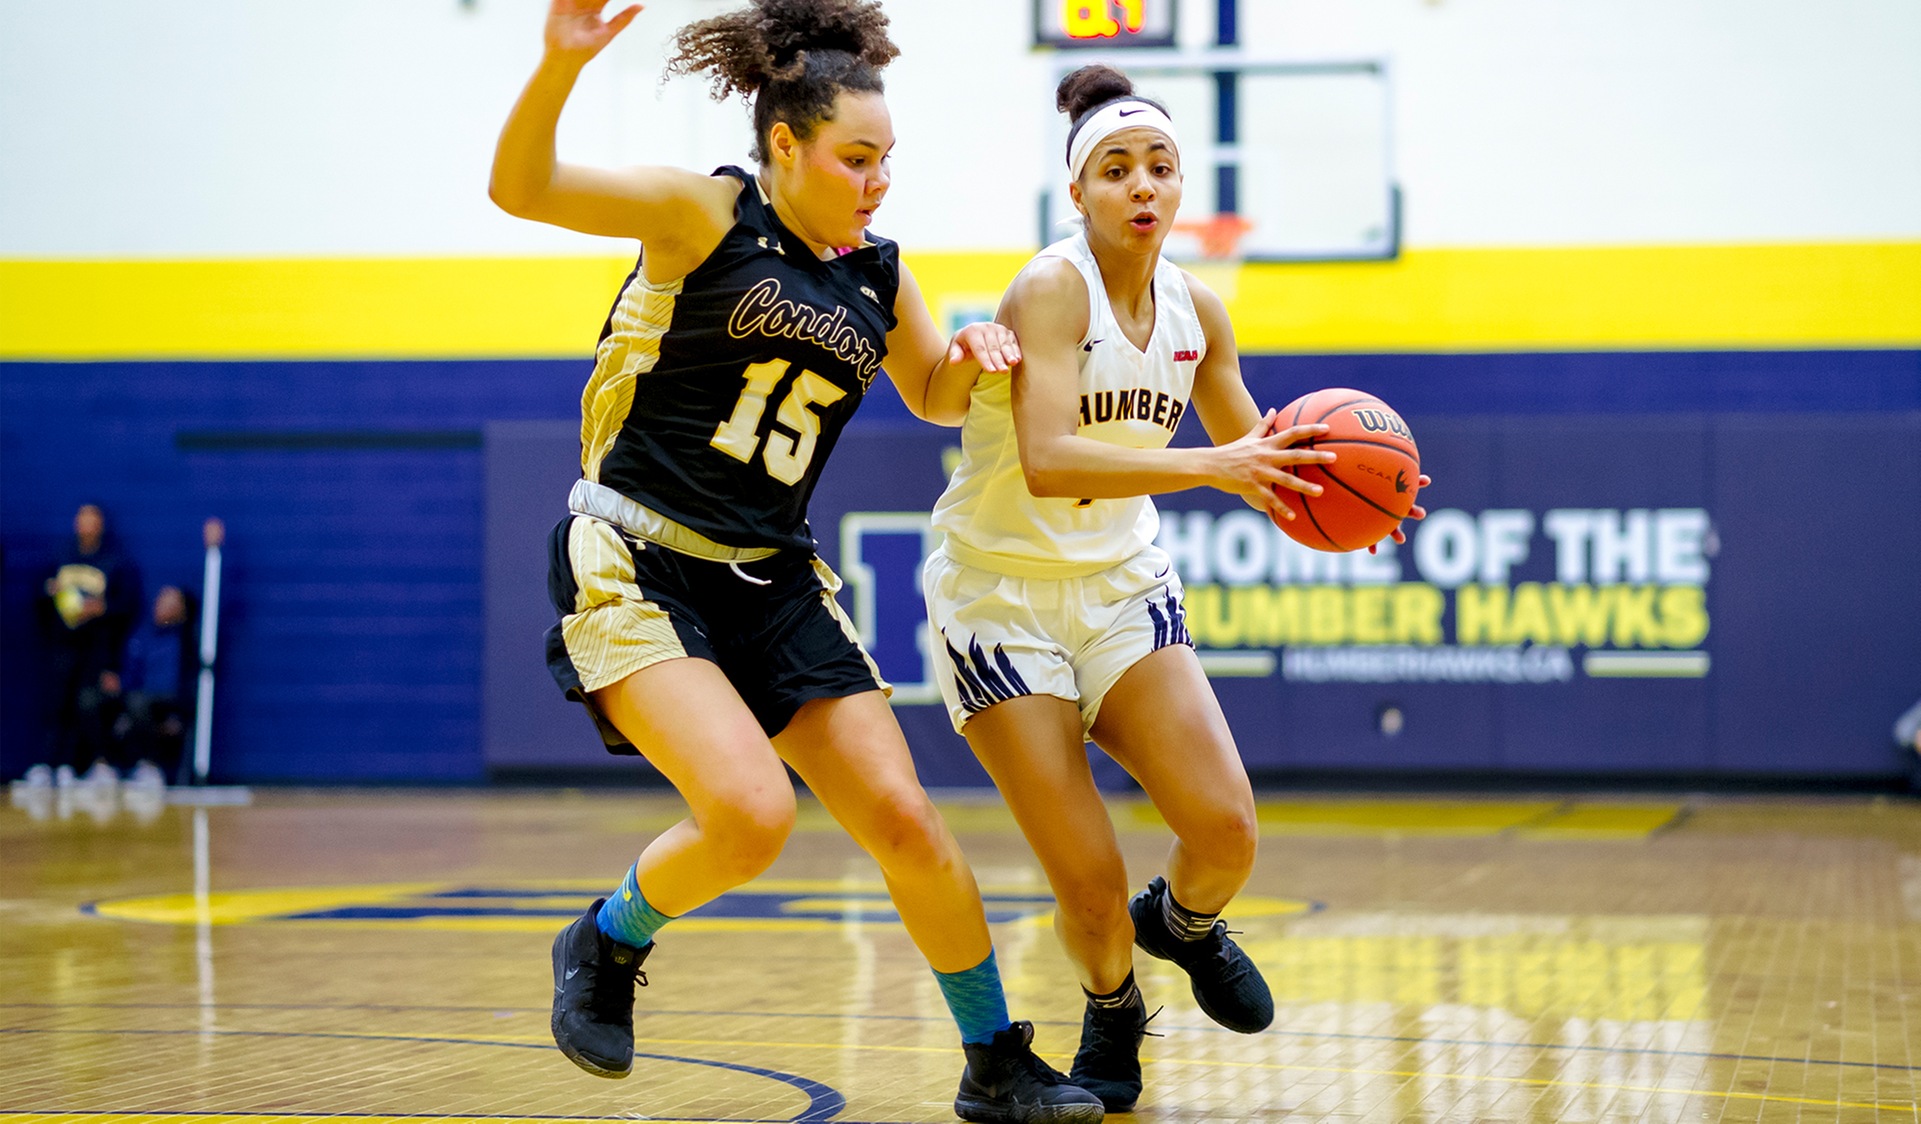 No. 11 WOMEN'S BASKETBALL CONCLUDES HOMESTAND WITH WIN OVER CONESTOGA, 73-47